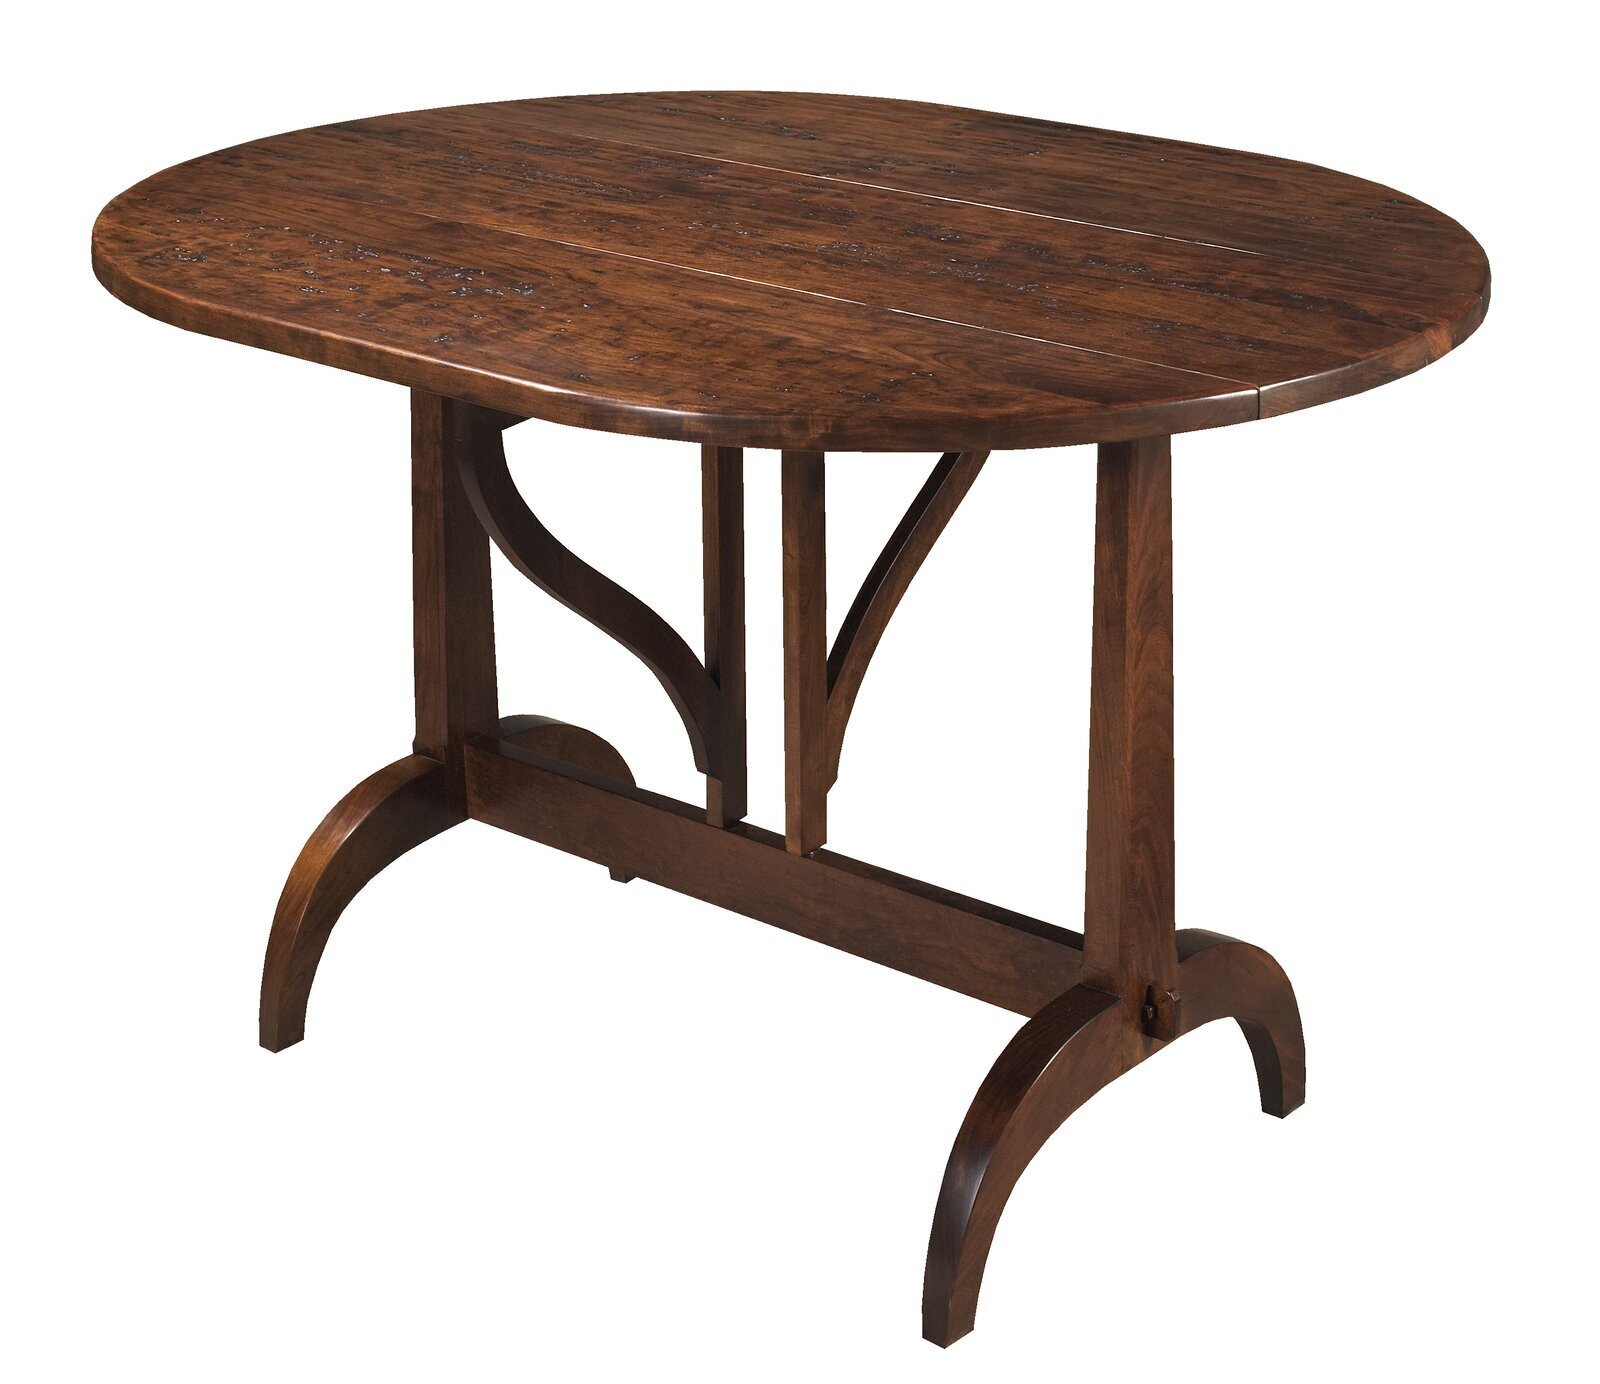 Oval folding table in a dark wood finish